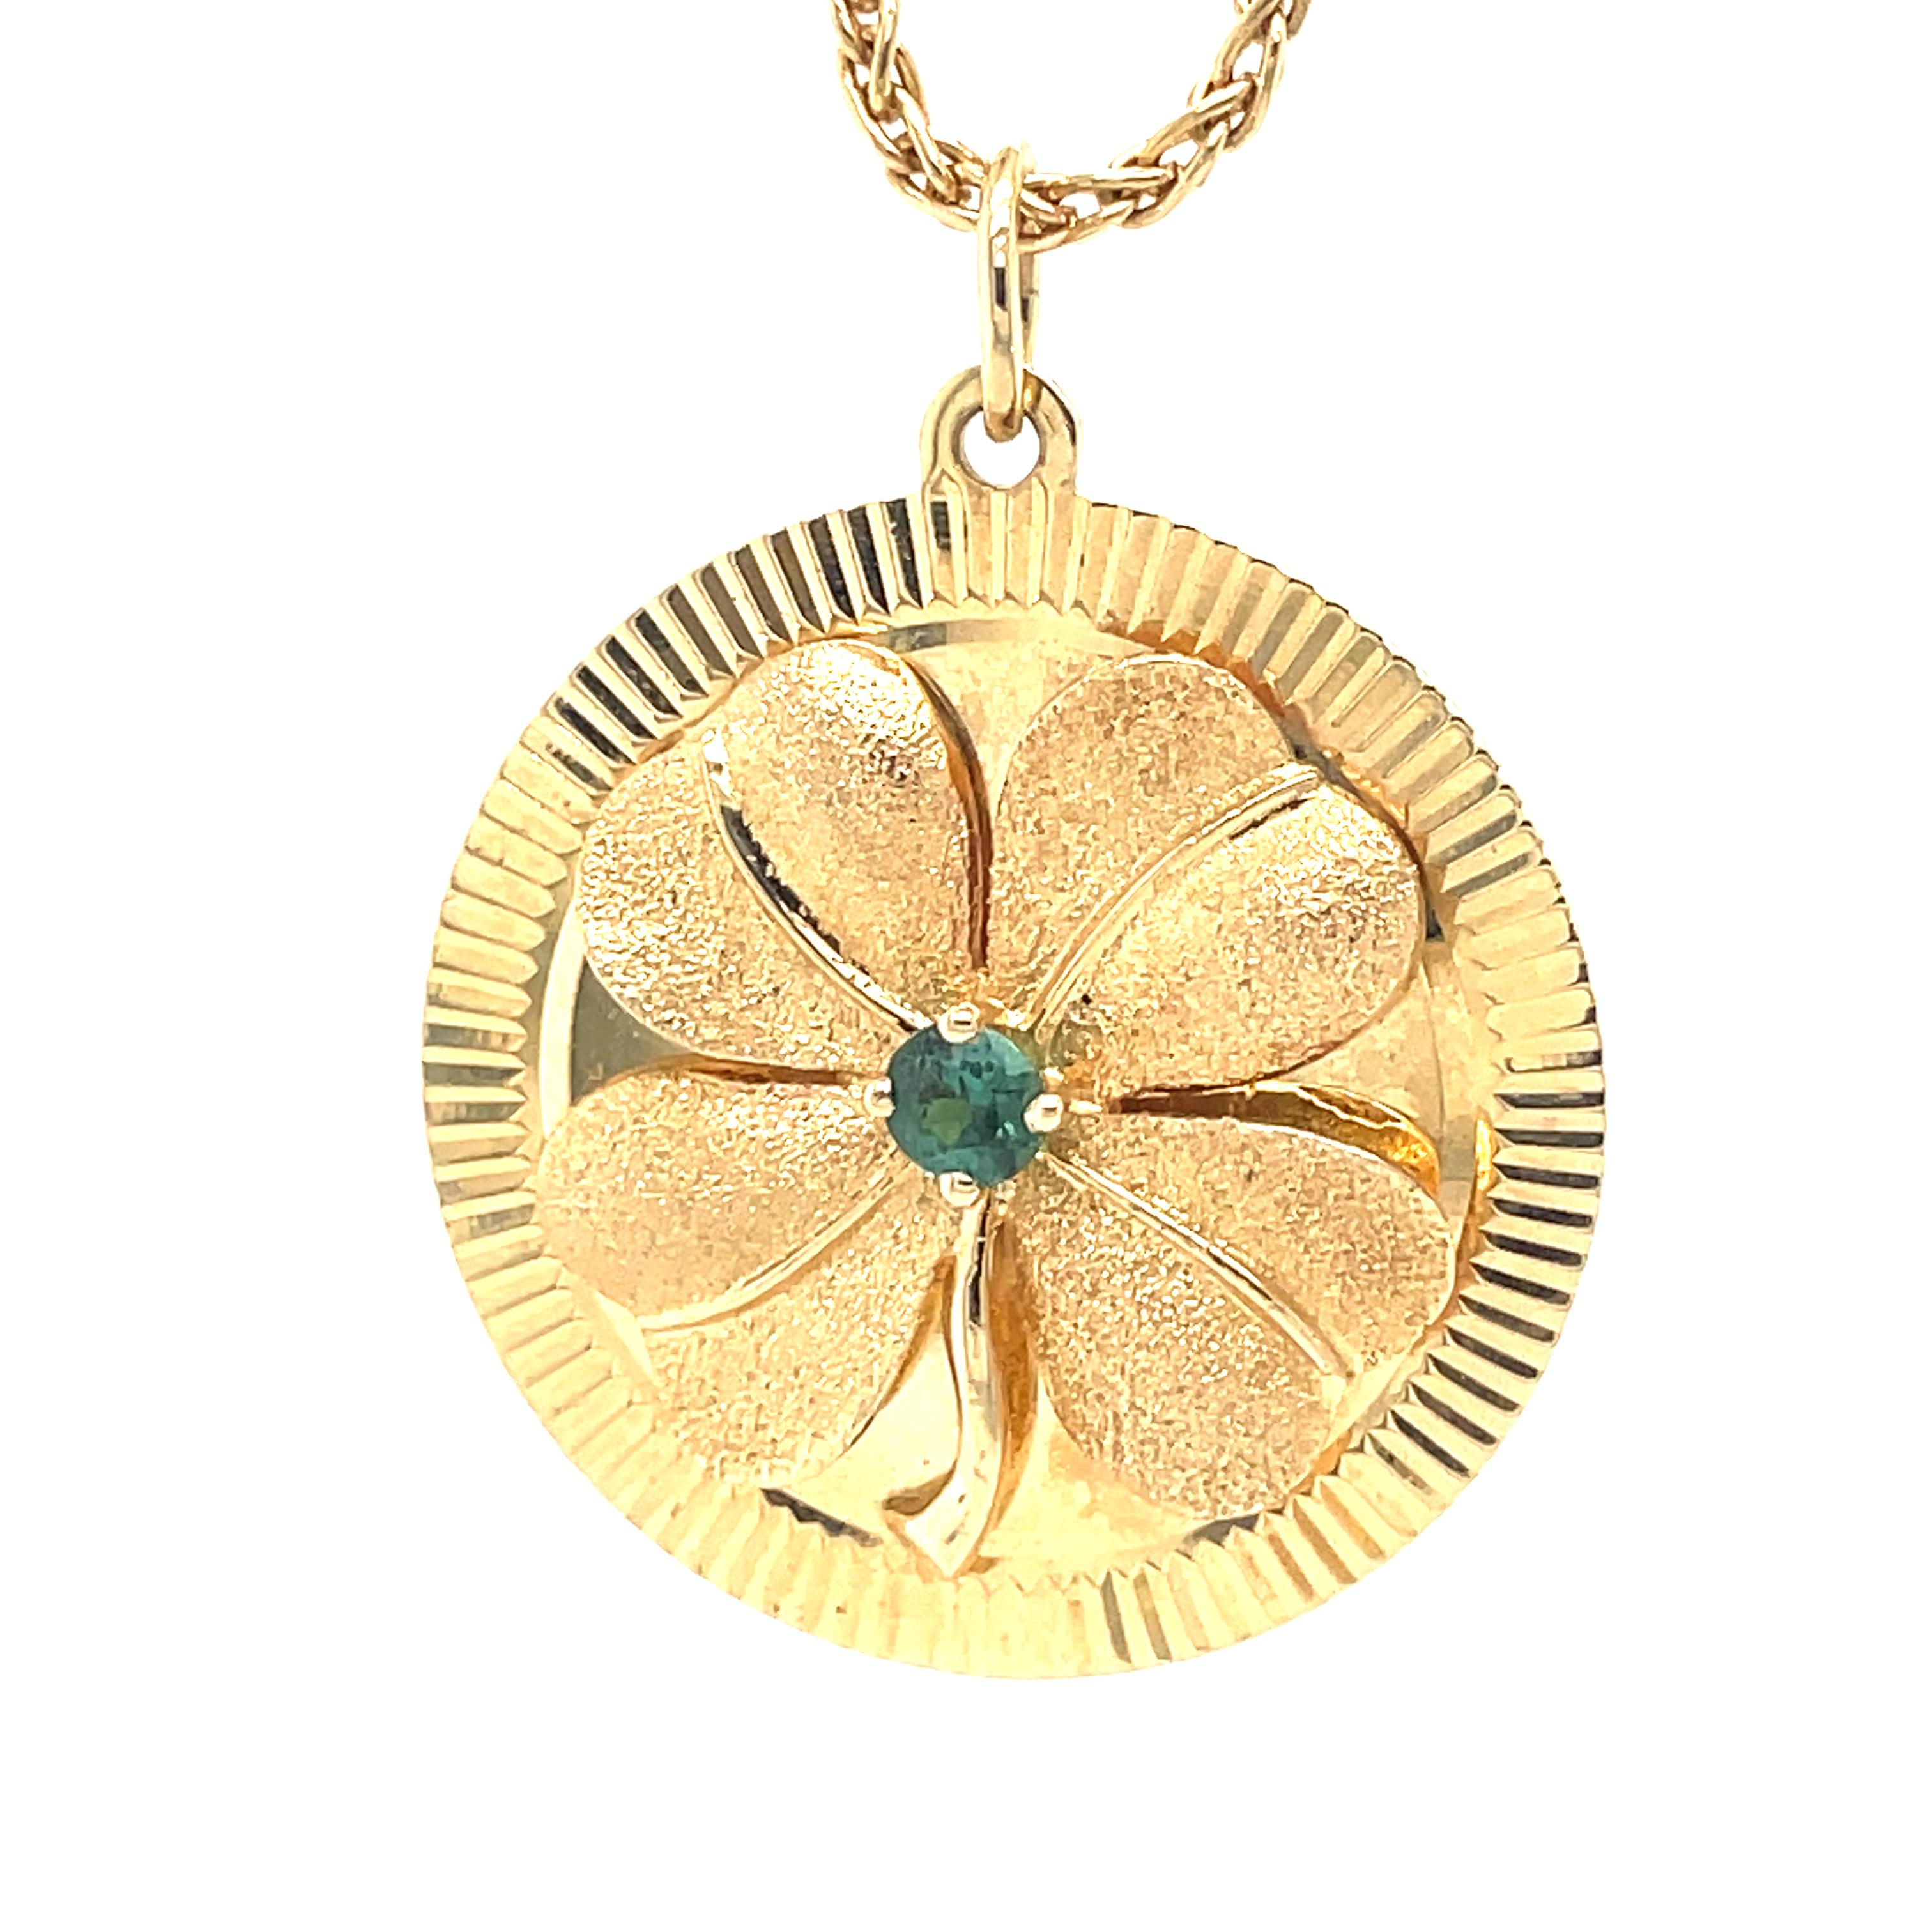 Superb good luck charm:  a three-dimensional four-leaf clover, set with a brilliant green tourmaline.  14K textured yellow gold.  Within a shiny 14K yellow gold.border, engraved in a fine line pattern.  Made and signed by HENRY DANKNER & SONS.  Very